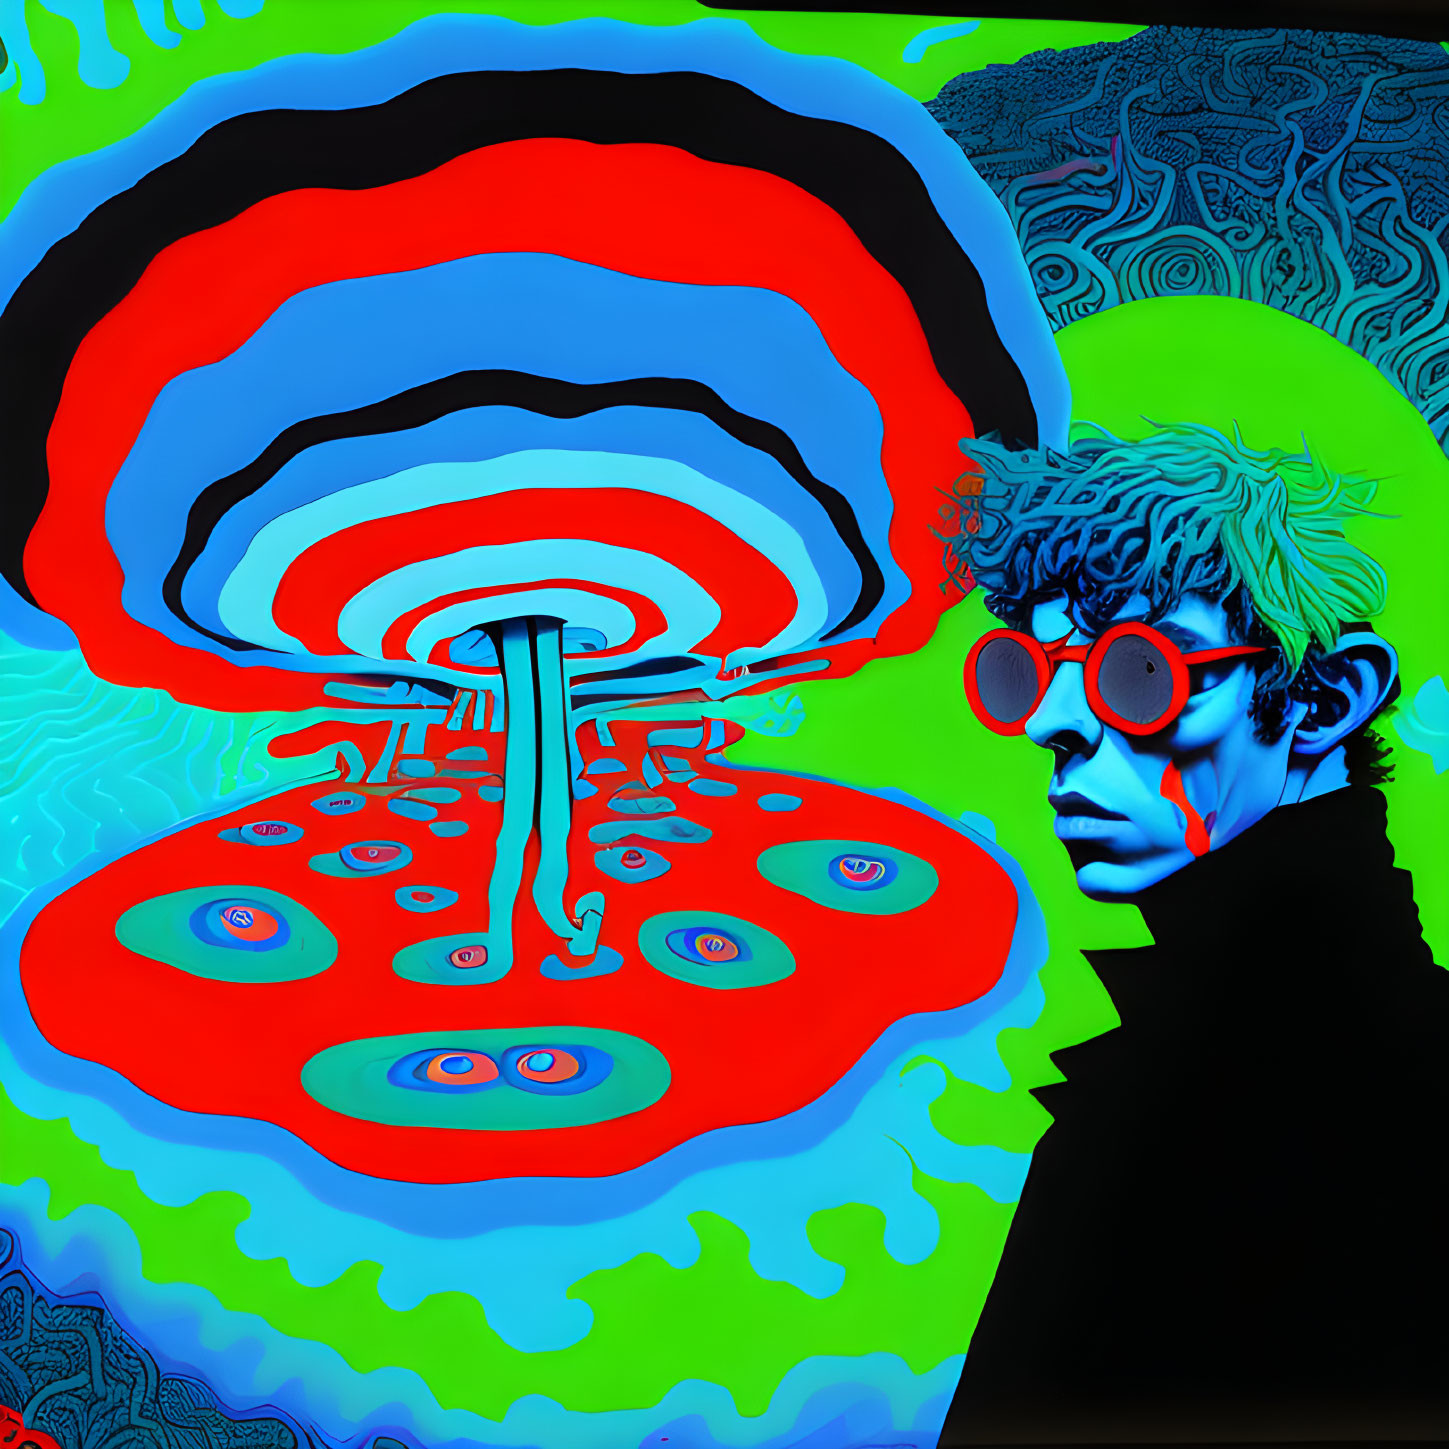 Colorful portrait with red glasses and psychedelic patterns on mushroom cloud backdrop